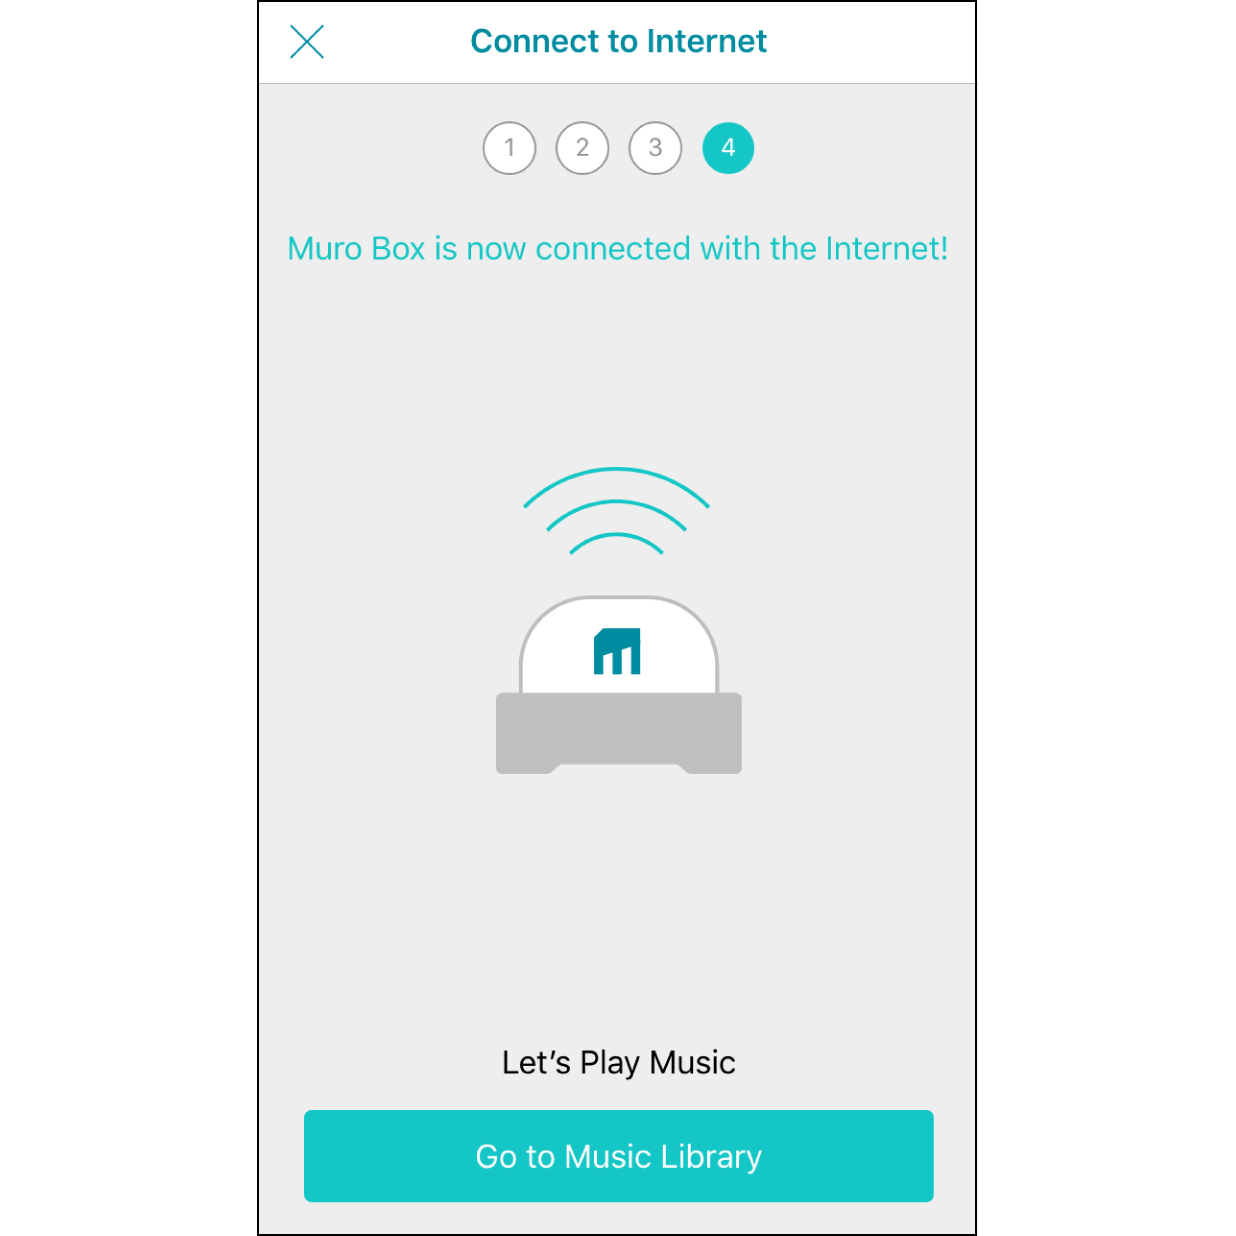 11. Connected to Muro Box Wi-Fi. After finishing the connection, you will hear a ding-dong sound from the Muro Box, and it will indicate "Connected to Muro Box". Click "Go to the Playlist" to play songs.